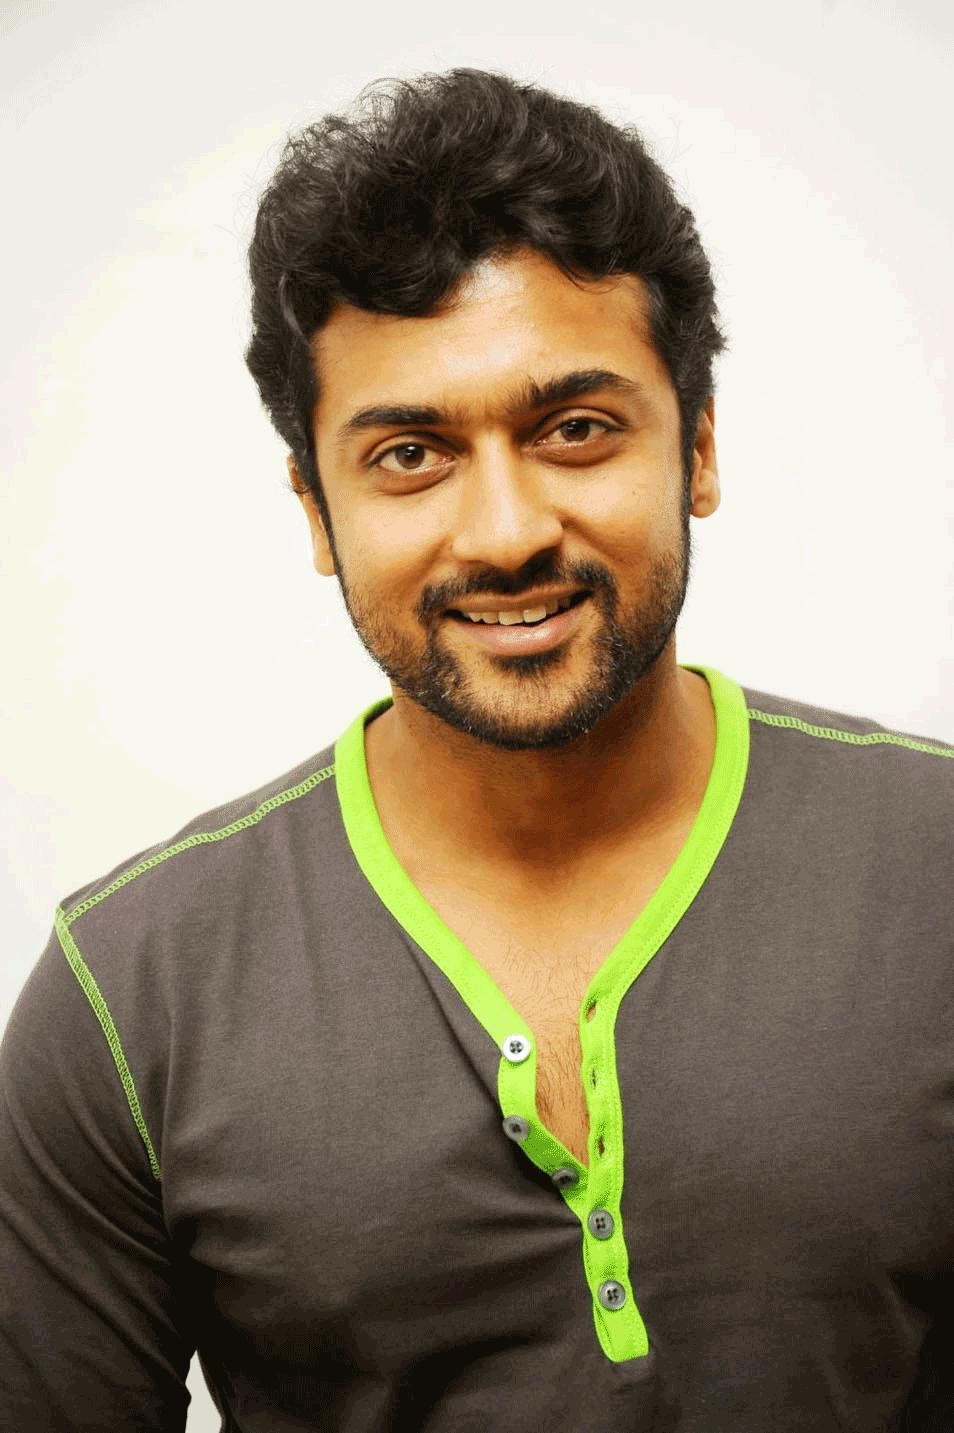 ACTOR SURYA HD PHOTOS STILLS IMAGES PICTURES WALLPAPERS. WHATSAPP GROUP LINKS JOIN LIST. HD photo, Photo wallpaper, Surya actor